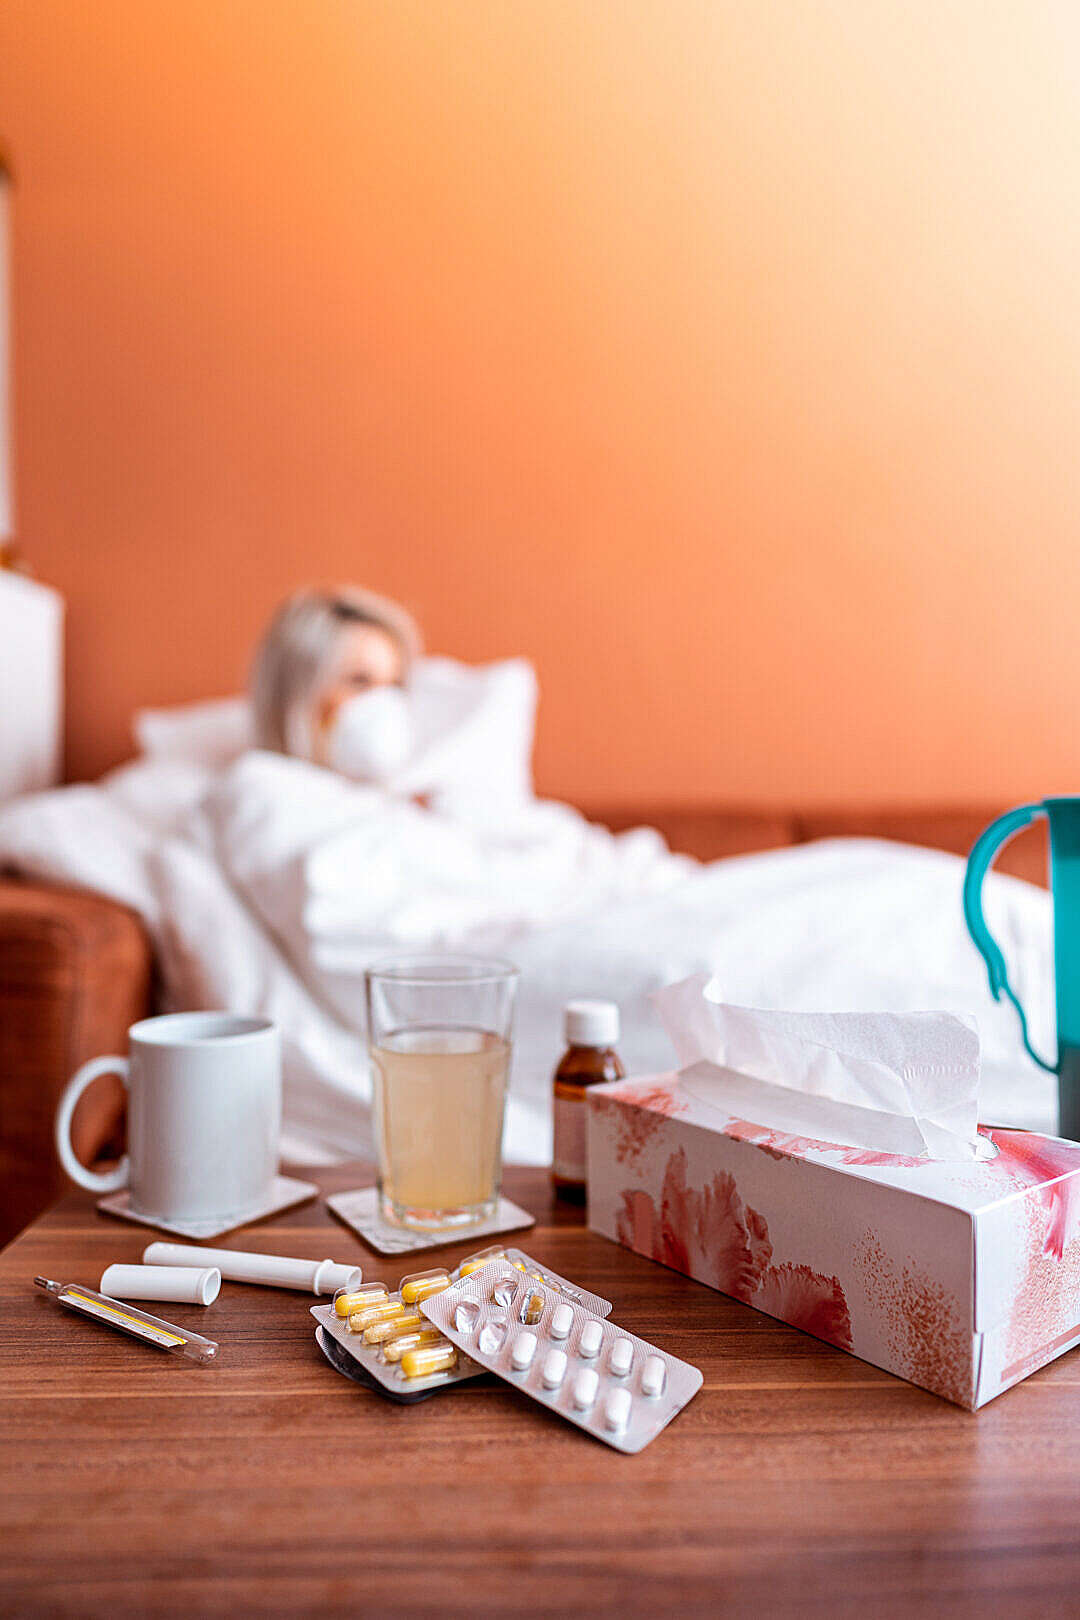 Download Young Sick Woman at Home in Corona Quarantine FREE Stock Photo